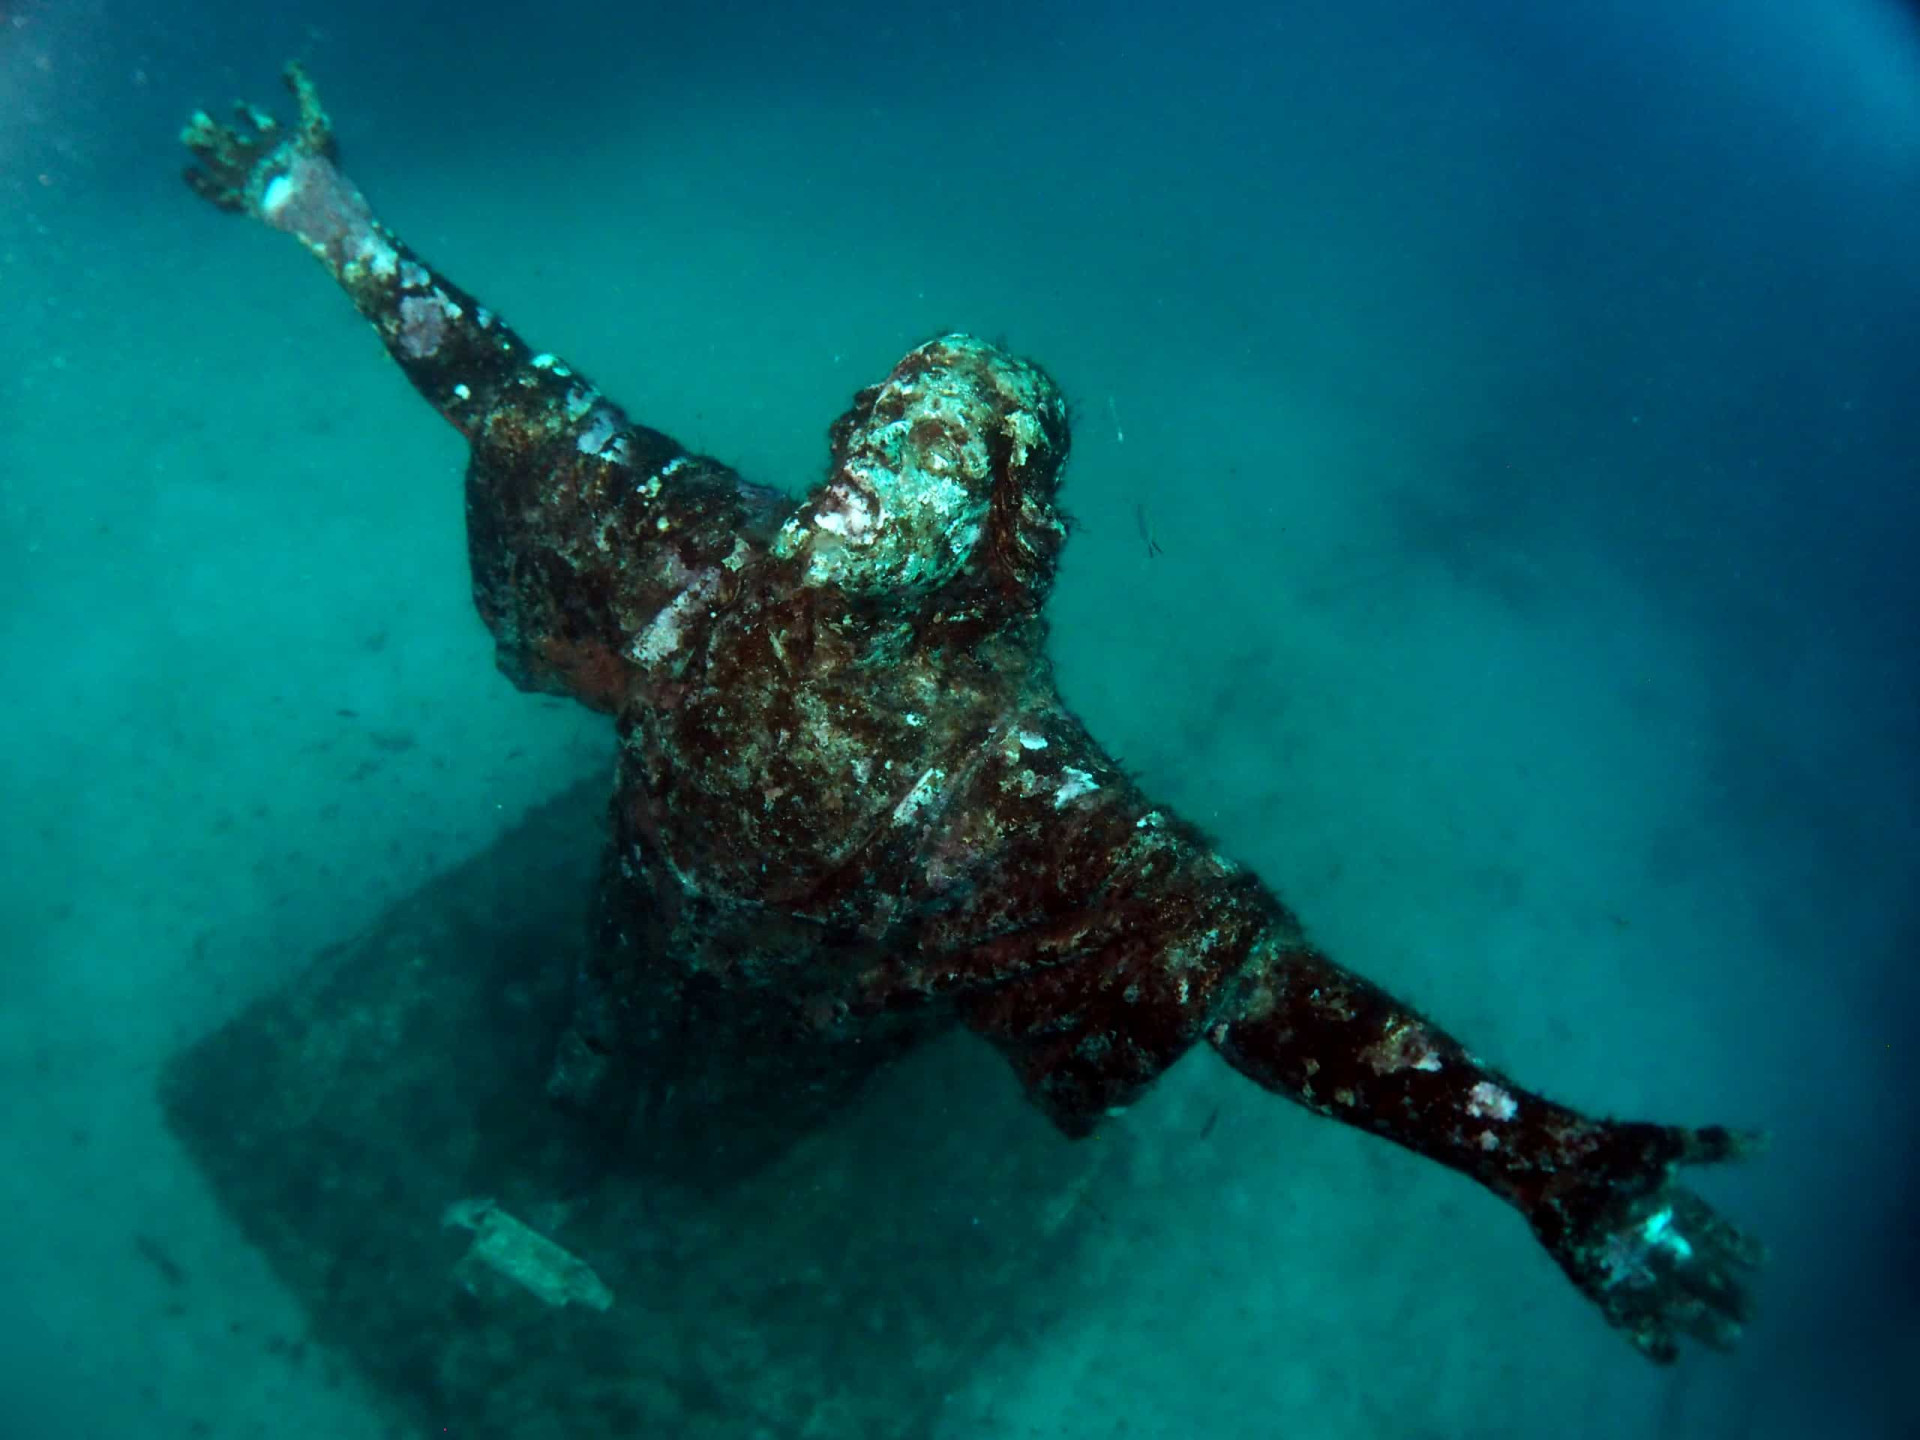 Divers can explore underwater cliffs, tunnels, and caves, as well as check out an underwater statue of Madonna.<p><a href="https://www.msn.com/en-us/community/channel/vid-7xx8mnucu55yw63we9va2gwr7uihbxwc68fxqp25x6tg4ftibpra?cvid=94631541bc0f4f89bfd59158d696ad7e">Follow us and access great exclusive content every day</a></p>